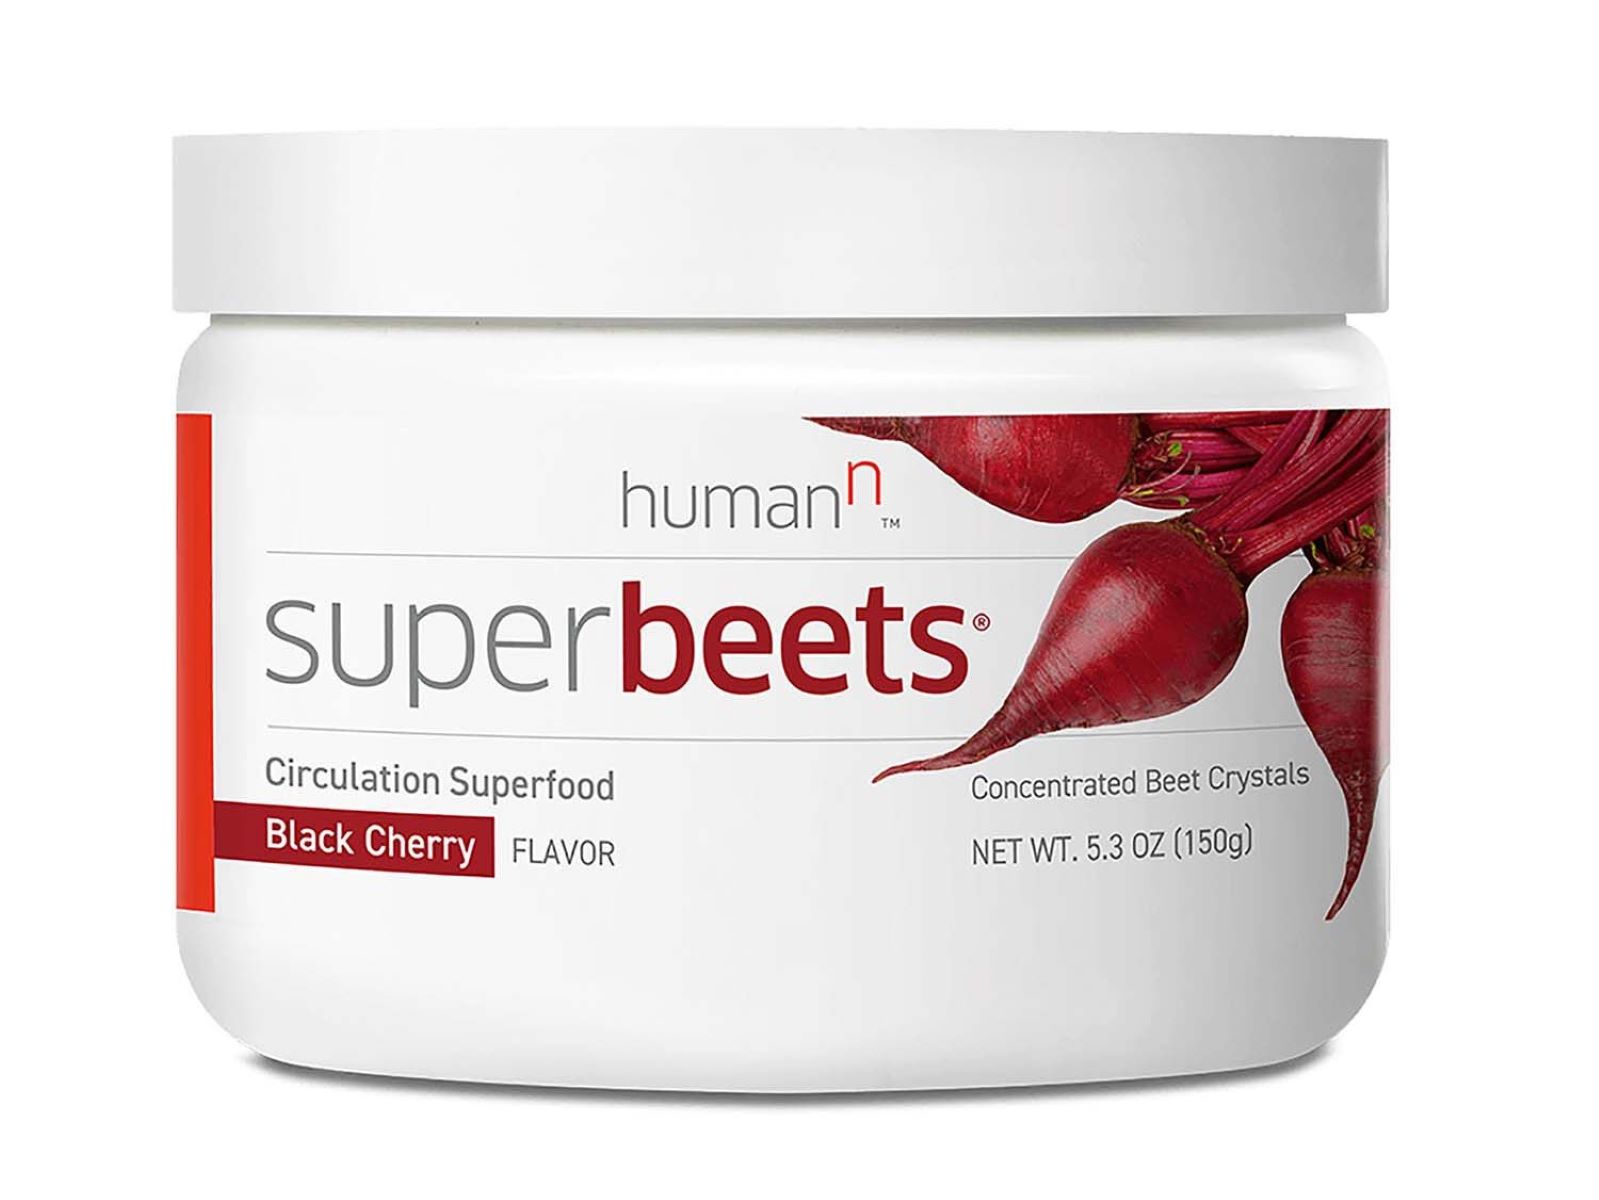 18-superbeets-nutrition-facts